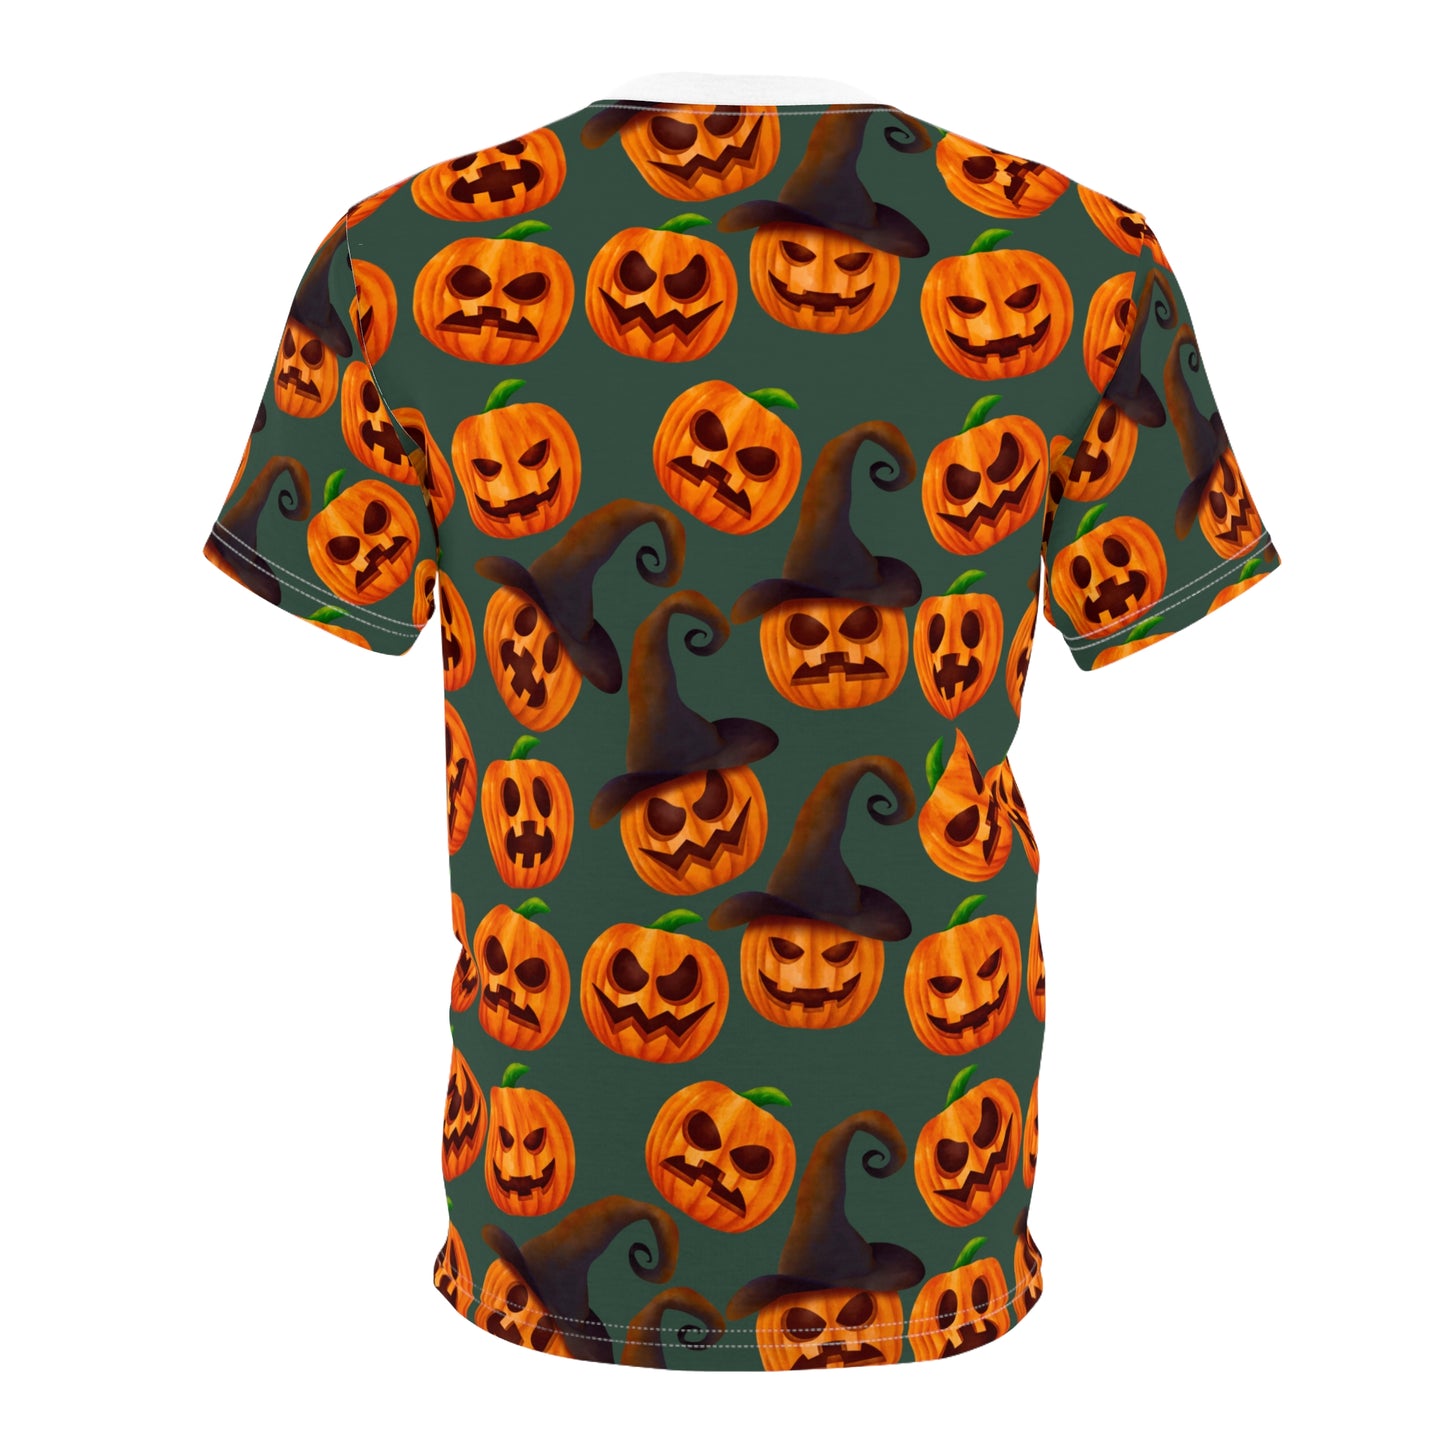 Halloween Designs, Abstract Style, Spooky Style, Unisex Cut & Sew Tee